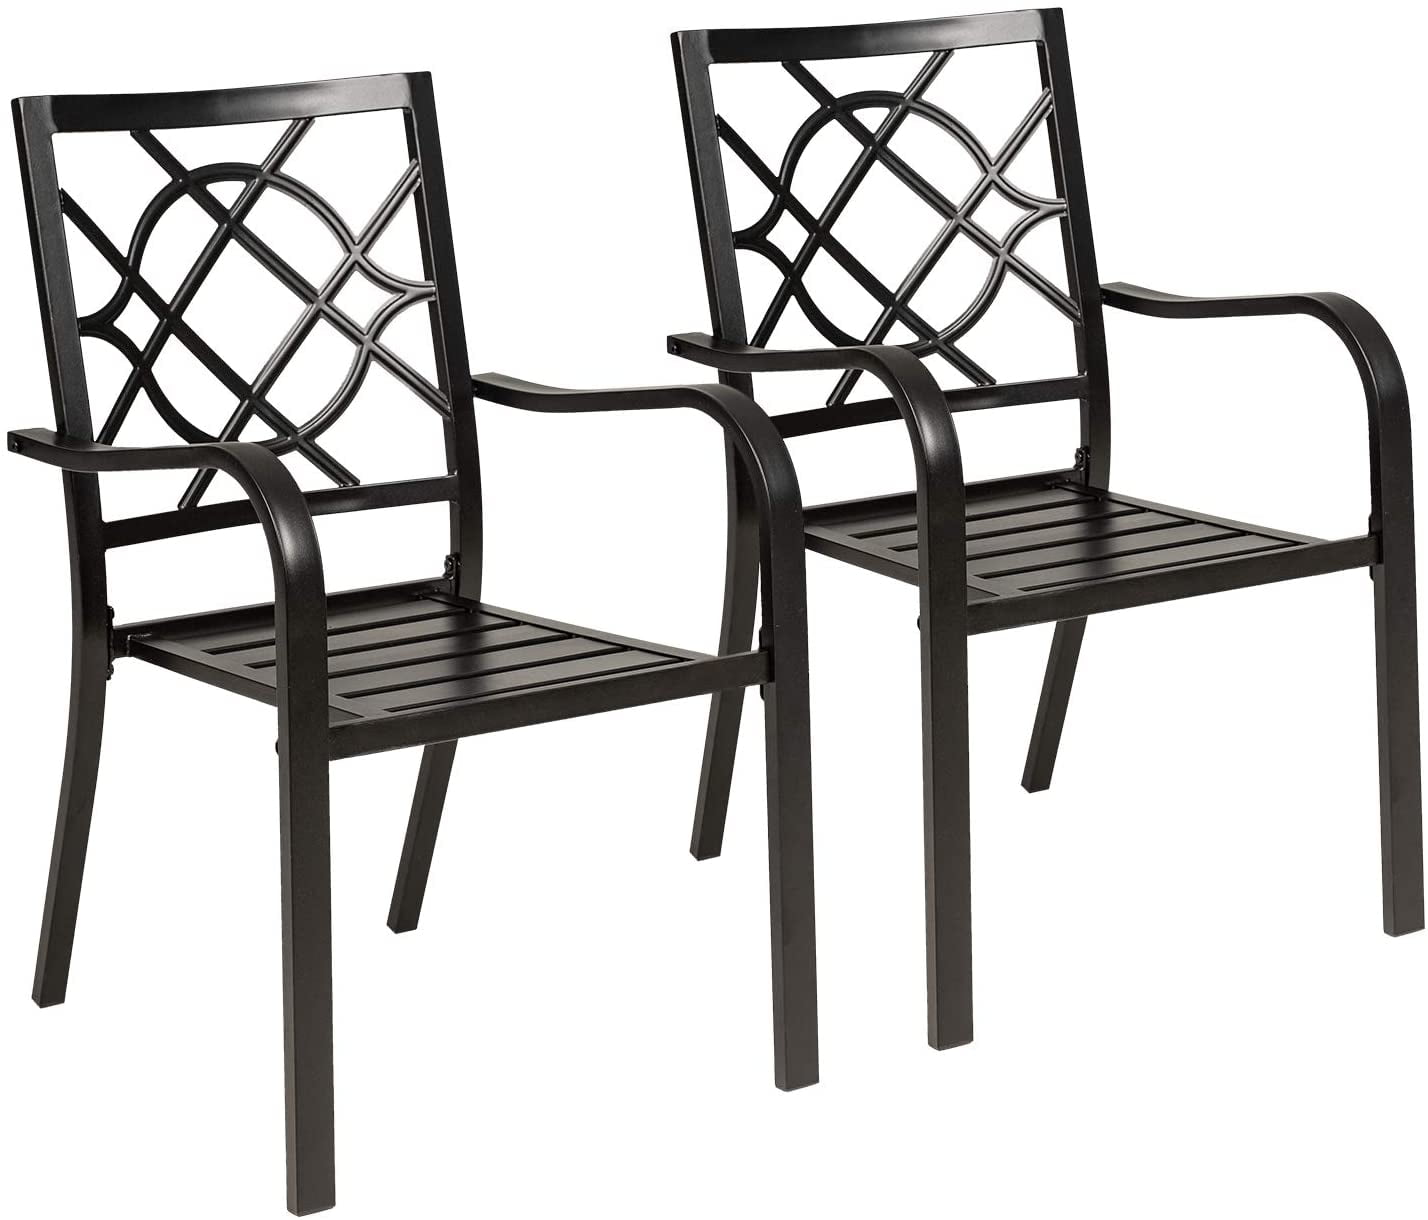 Suncrown Patio Chairs Set Of 2 Outdoor, Garden Treasures Stackable Metal Spring Motion Dining Chairs With Mesh Seat